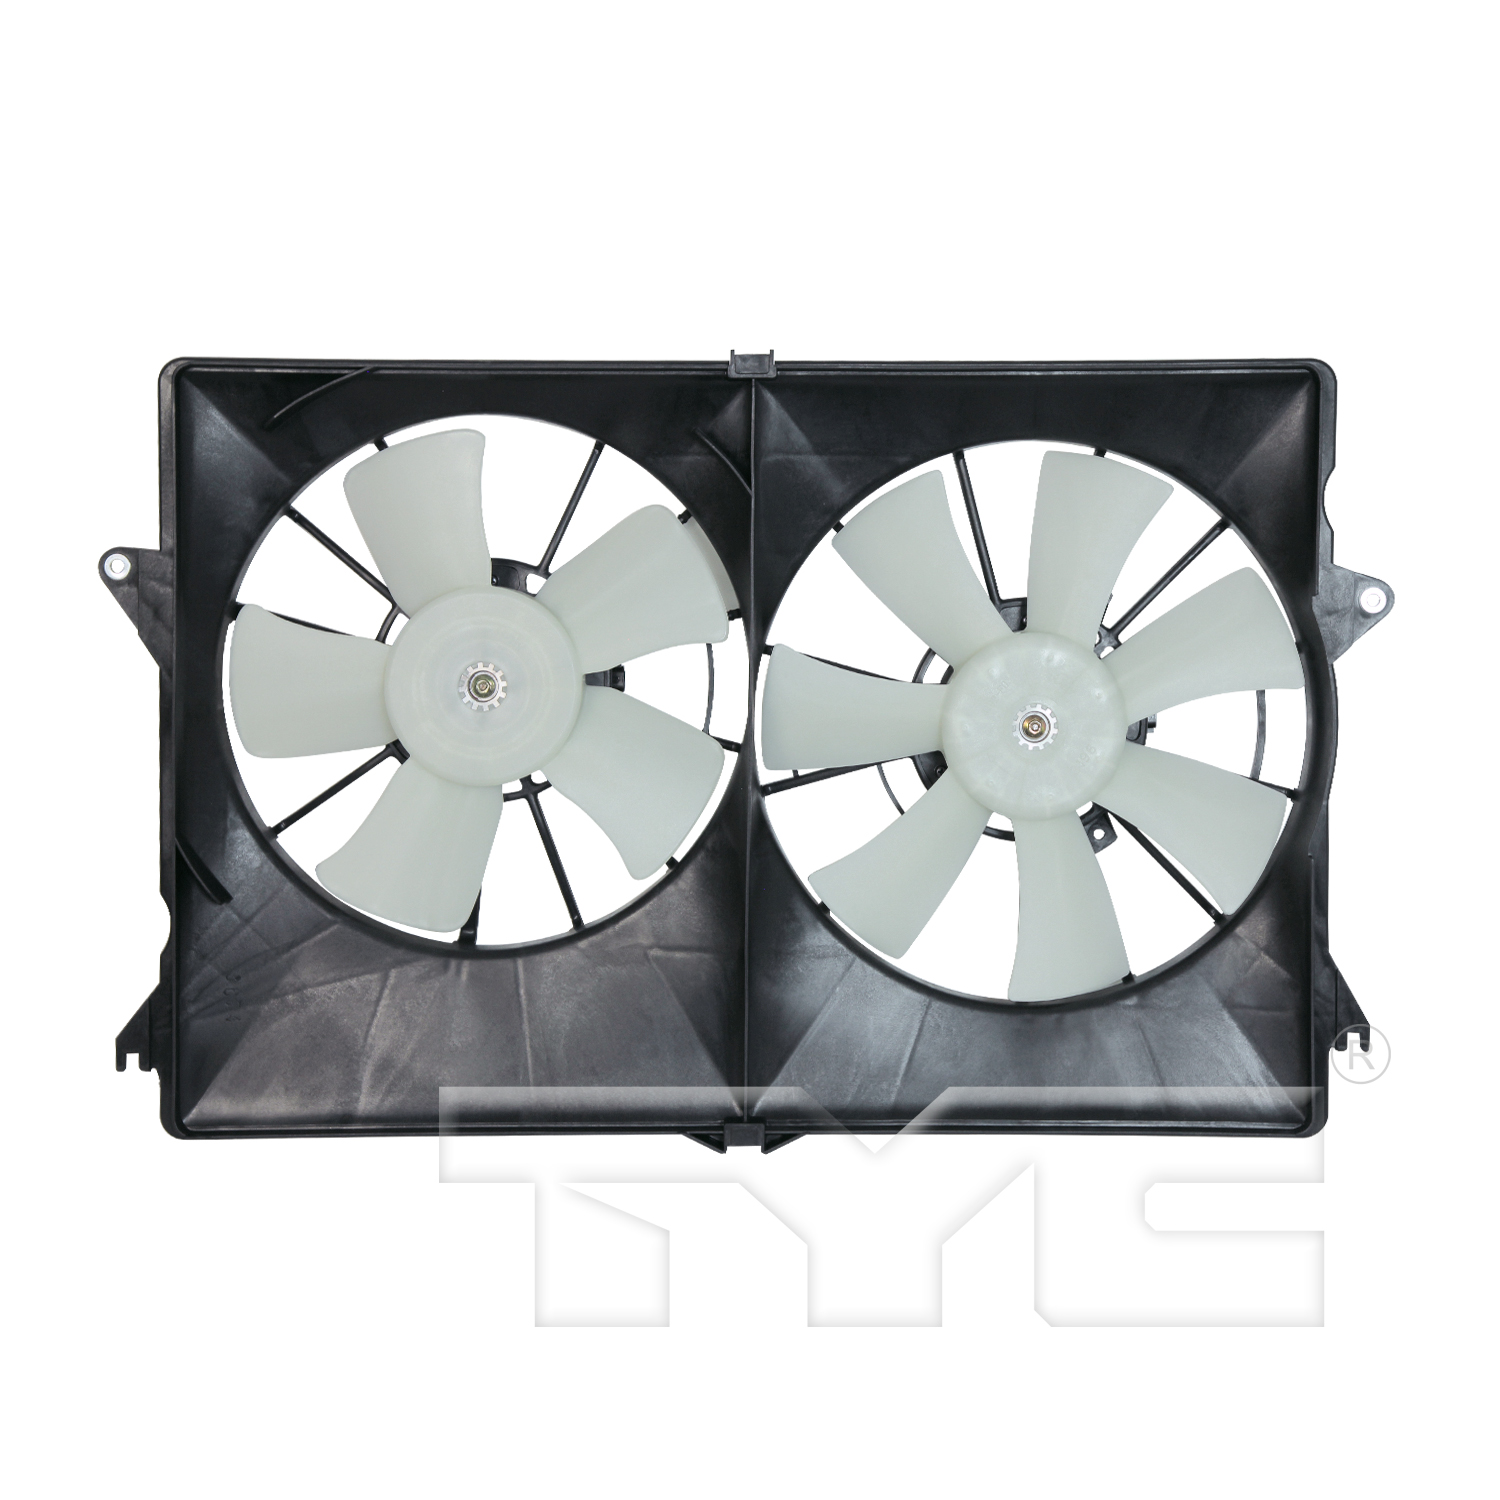 Aftermarket FAN ASSEMBLY/FAN SHROUDS for CHRYSLER - PACIFICA, PACIFICA,04-06,Radiator cooling fan assy